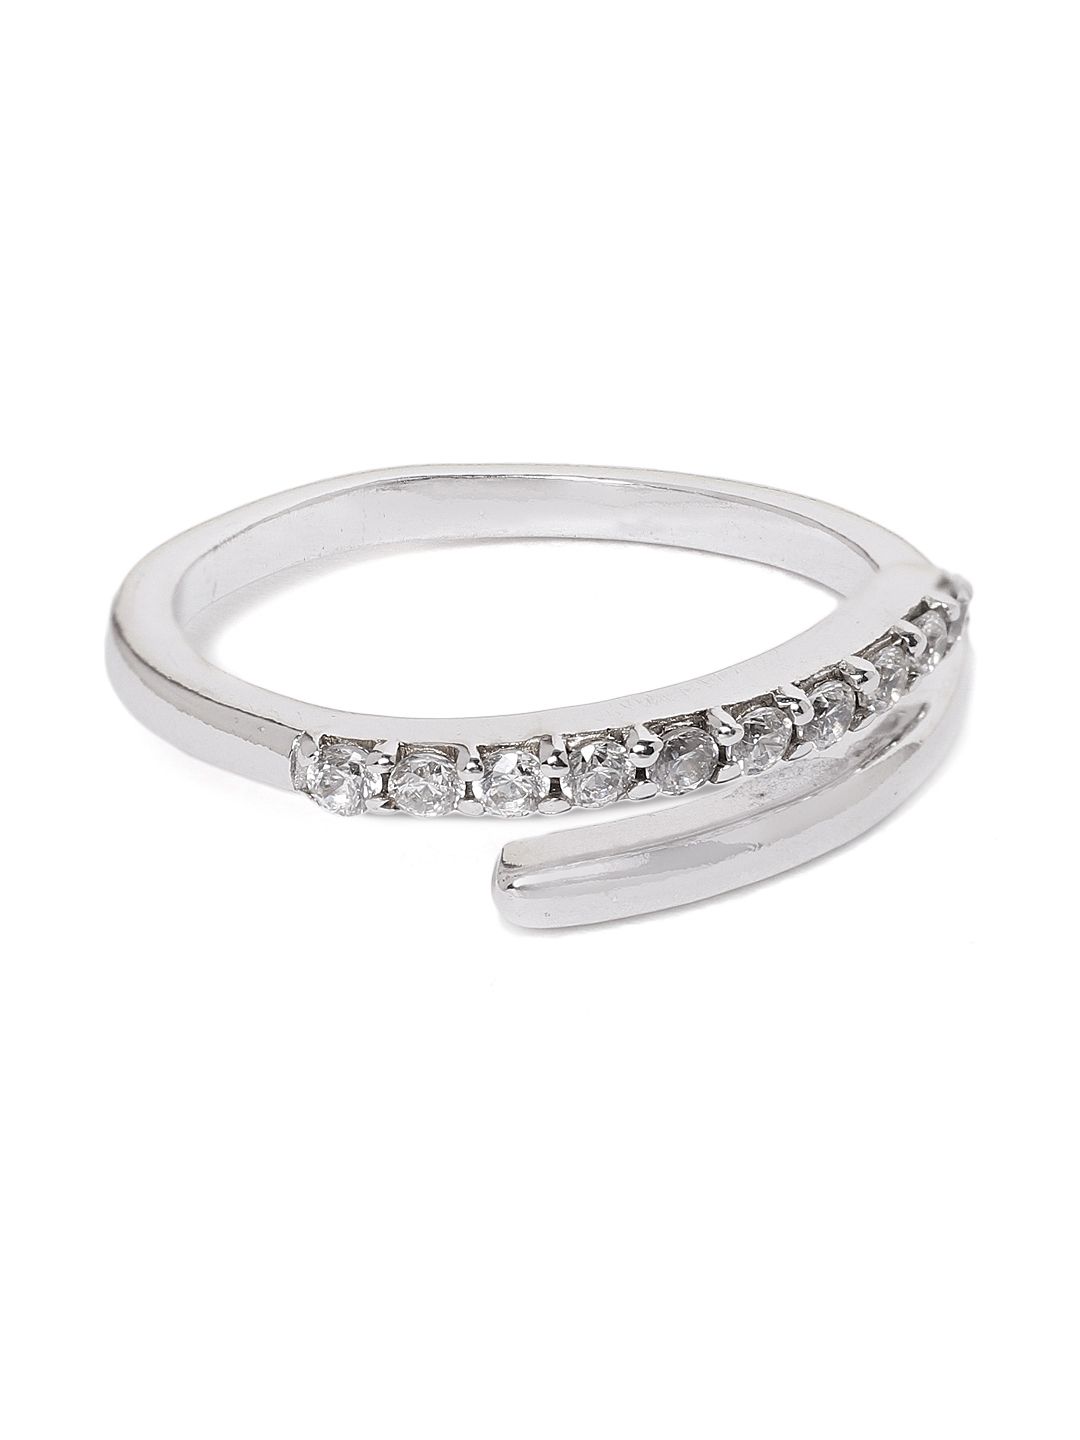 Carlton London Women Silver-Toned Rhodium-Plated CZ-Studded Adjustable Finger Ring Price in India